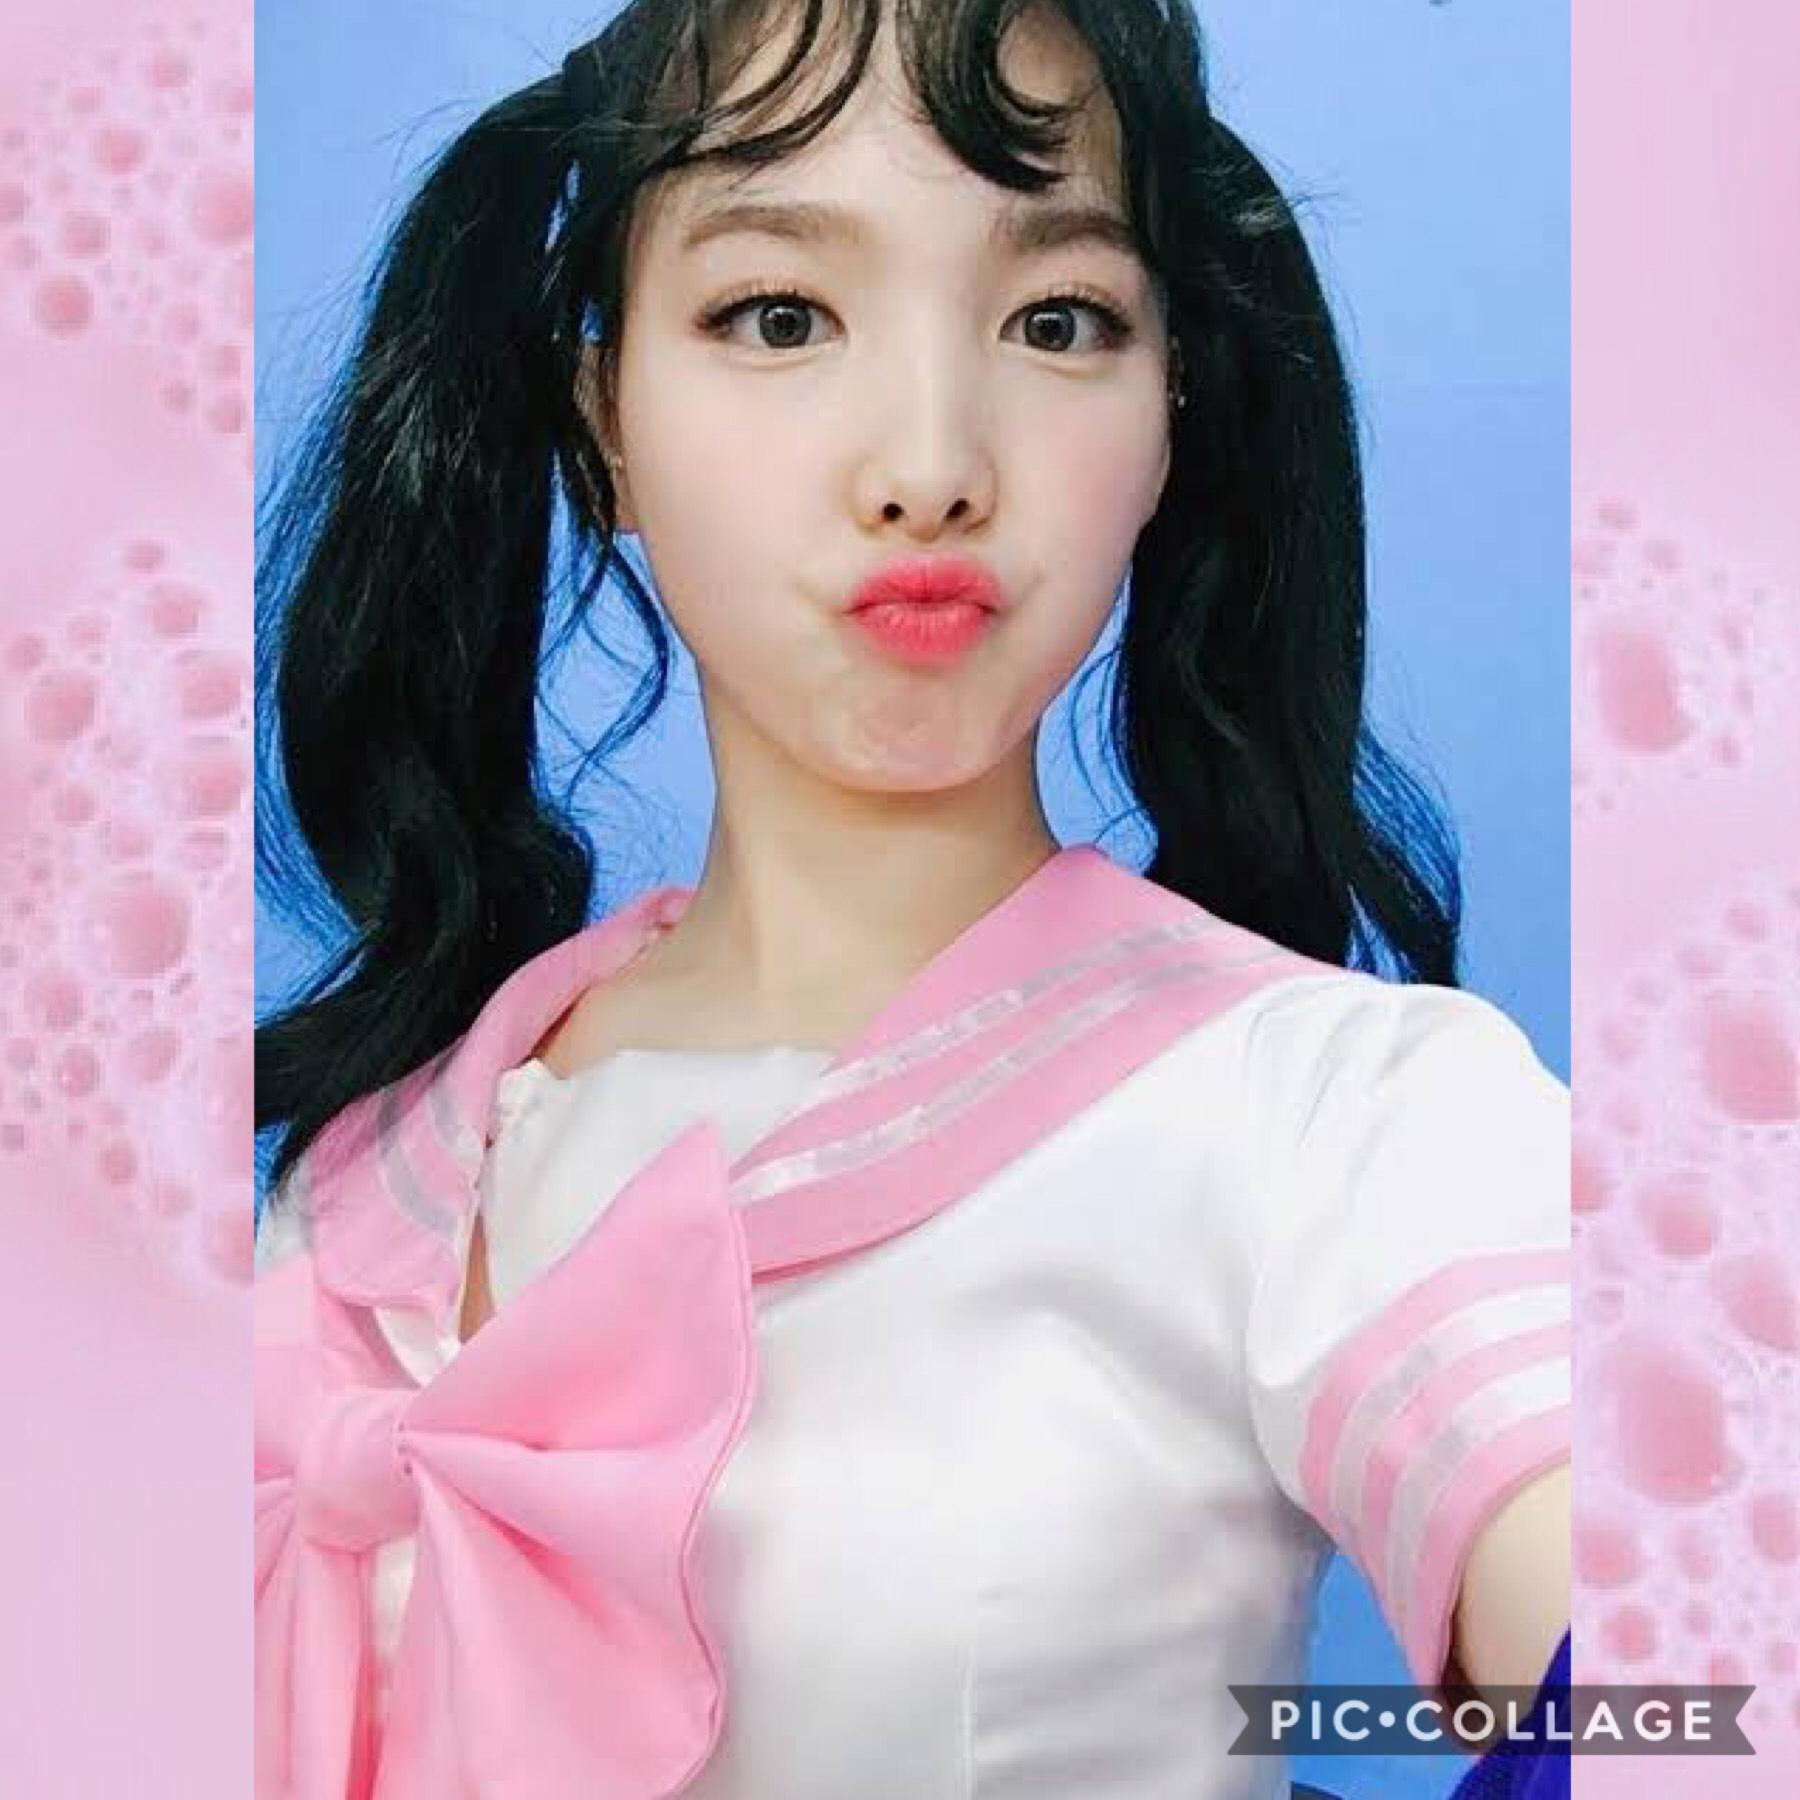 ♡
nayeon again :o skdjsk
bc of sailor nayeon moon my uwus are out of control


stan twice